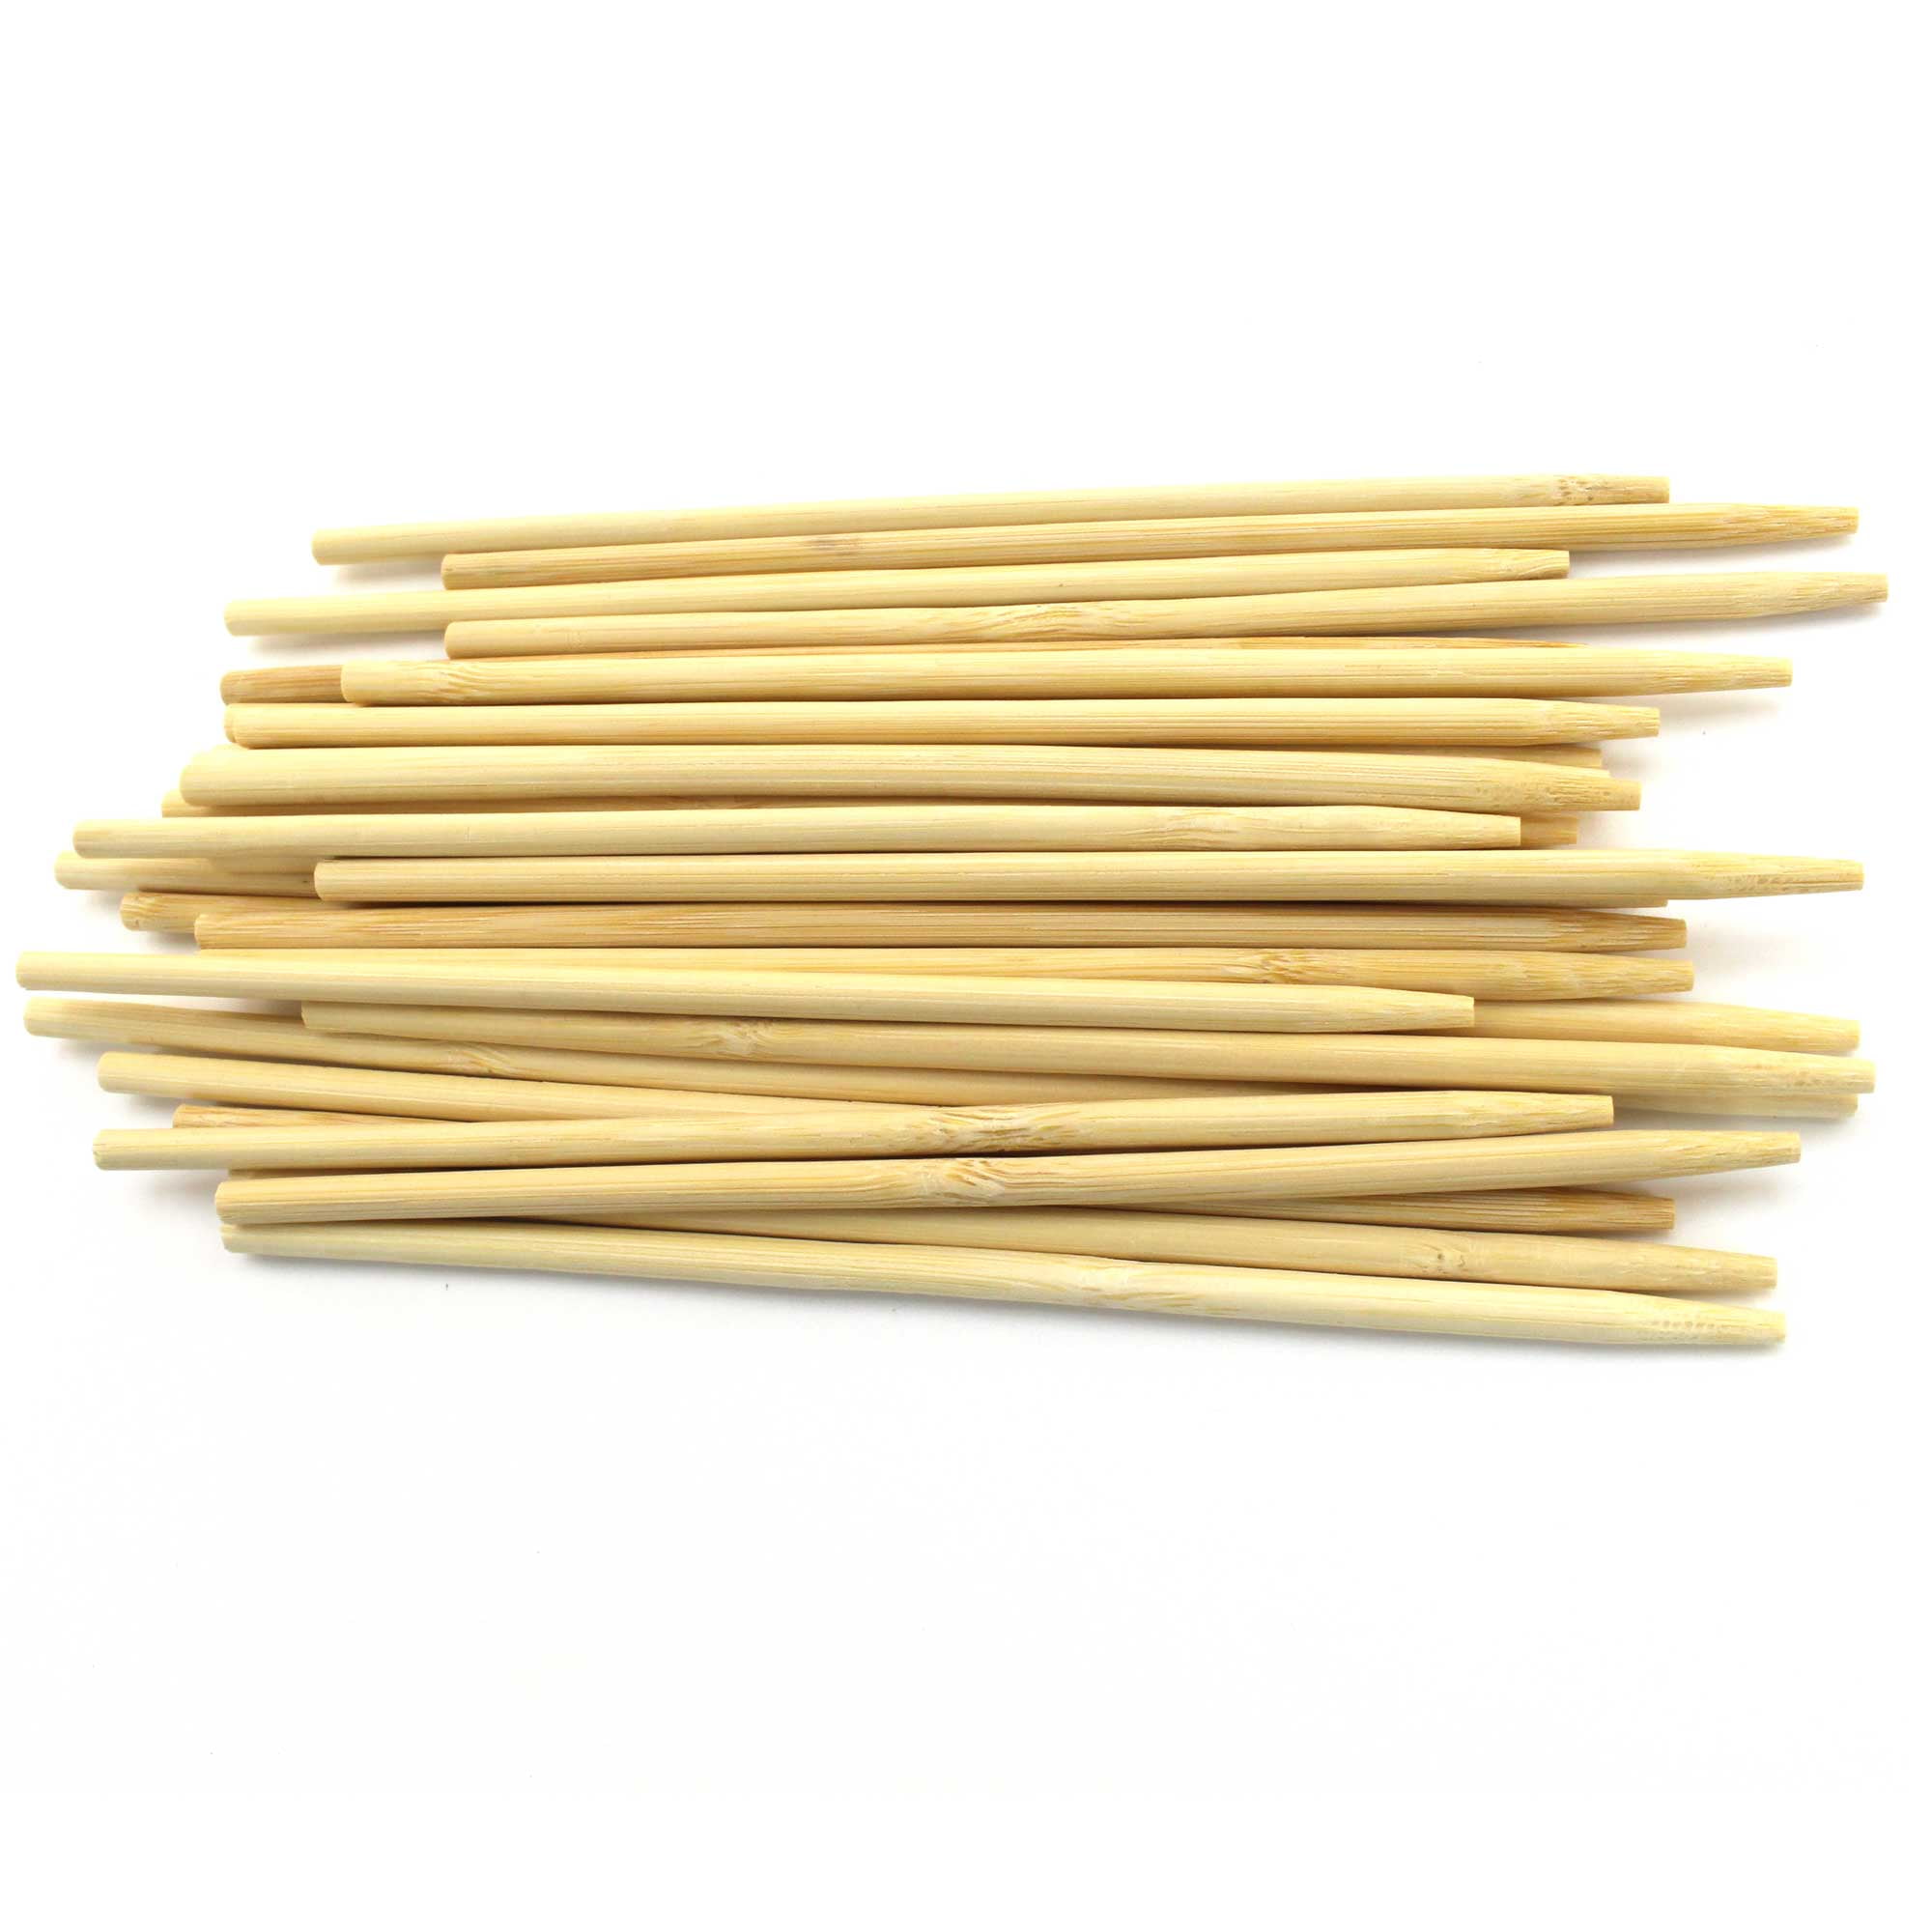 Candy Apple STICKS 5 1/2" Wood great for Hot dogs & Corn Dogs #4155M 